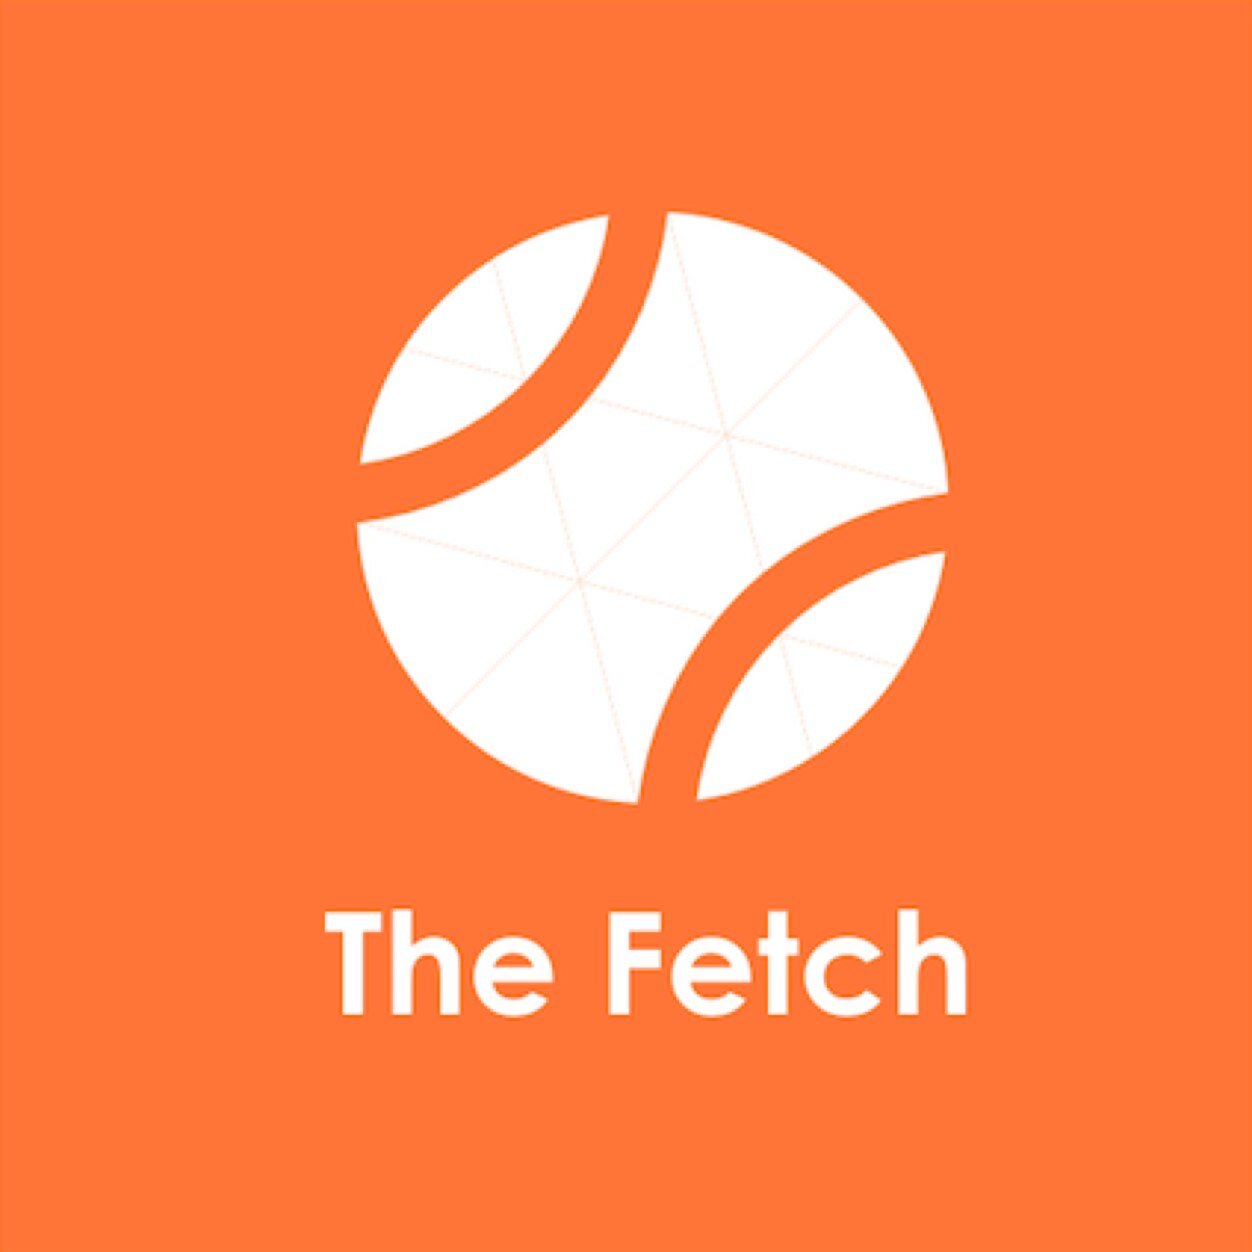 The Fetch is a guide to the best remote events, online courses, virtual conferences, webinars, bootcamps, workshops, livestreams, and more. Follow @thefetch. 💯